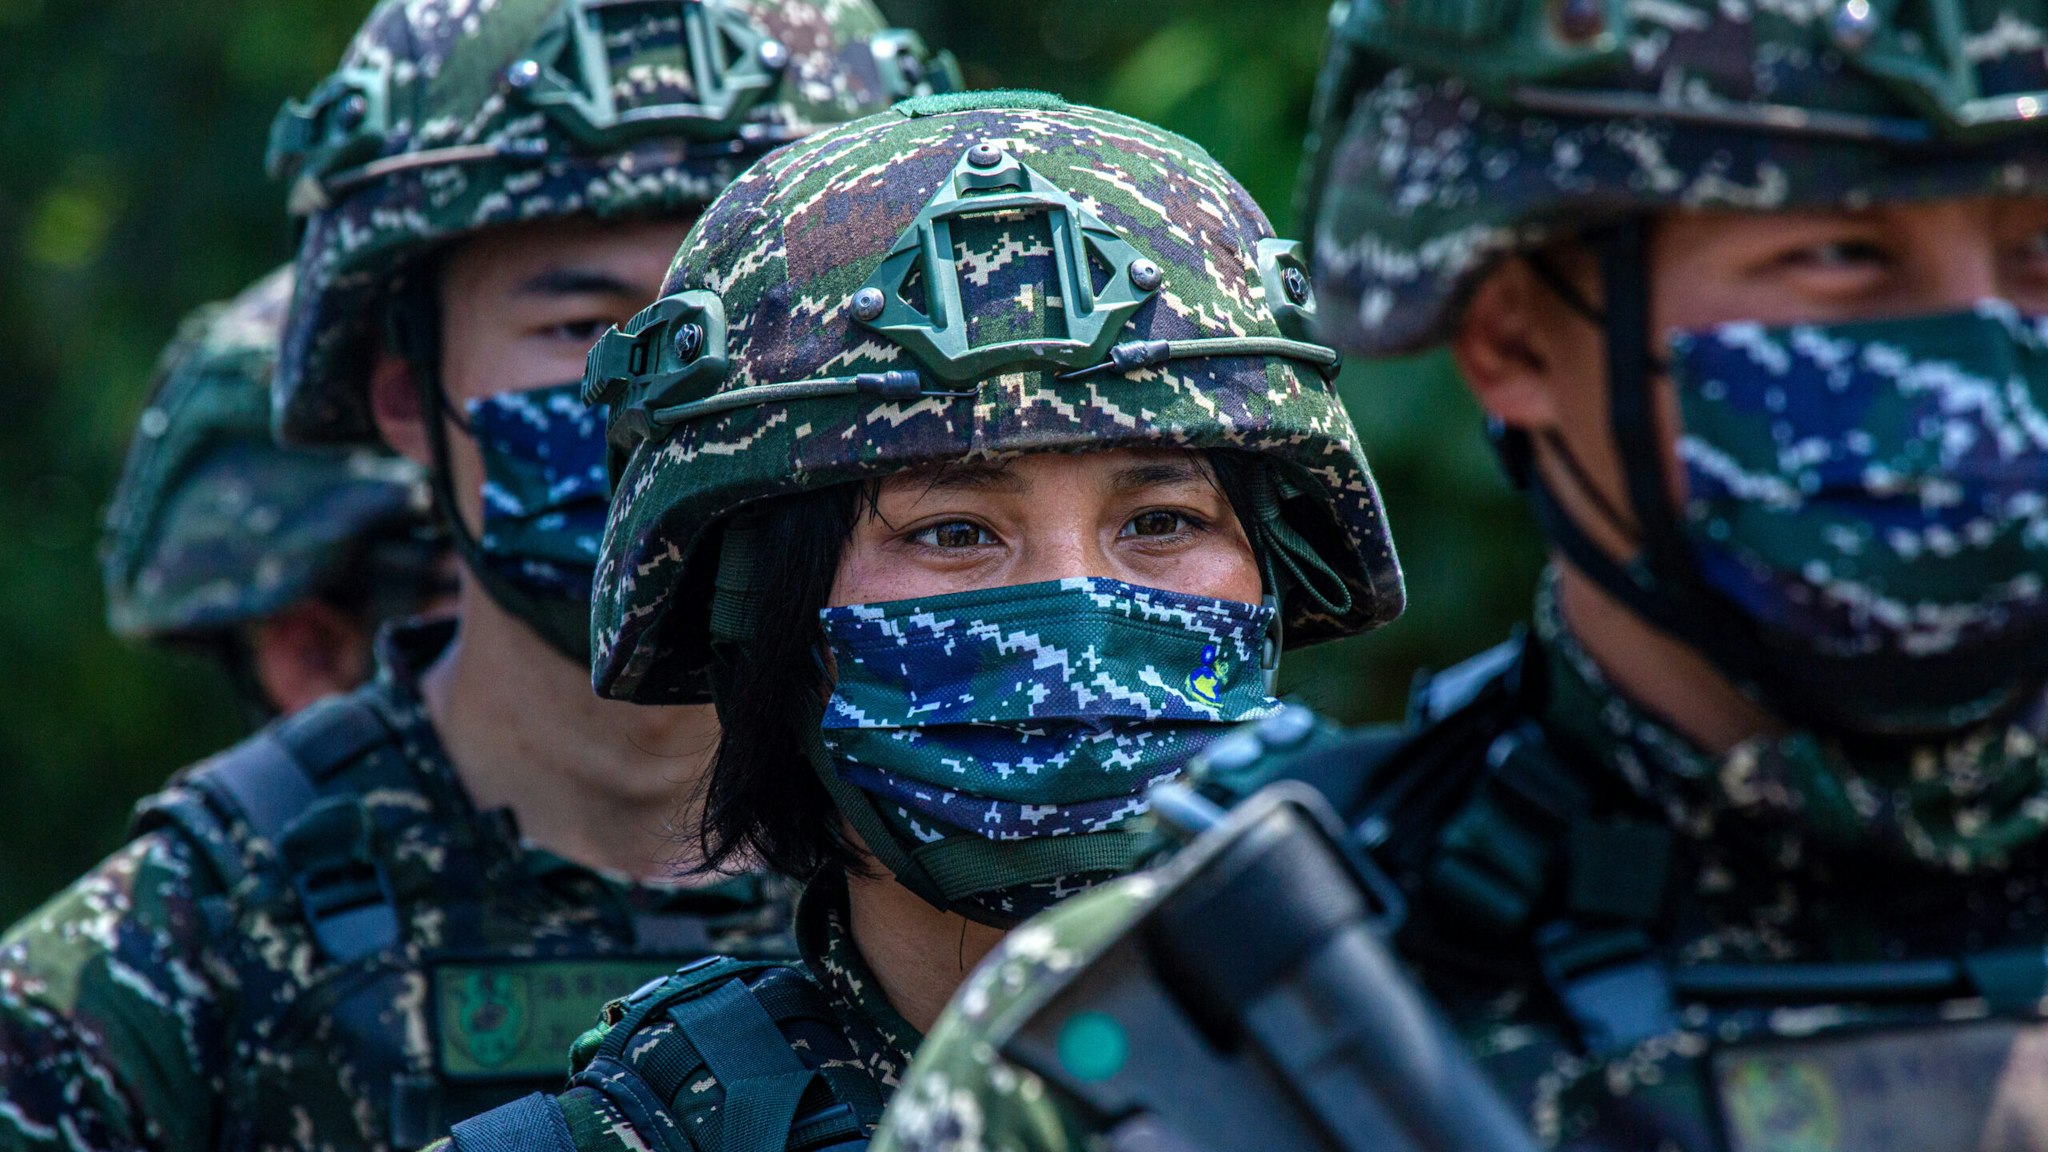 NEW TAIPEI CITY, TAIWAN - JULY 27: Taiwanese military personnel stand in a line during the Han Kuang military exercise, which simulates China's People's Liberation Army (PLA) invading the island on July 27, 2022 in New Taipei City, Taiwan. Taiwan military launches a weeklong of live fire drills involving all forces of the military to repel simulated attacks from China.